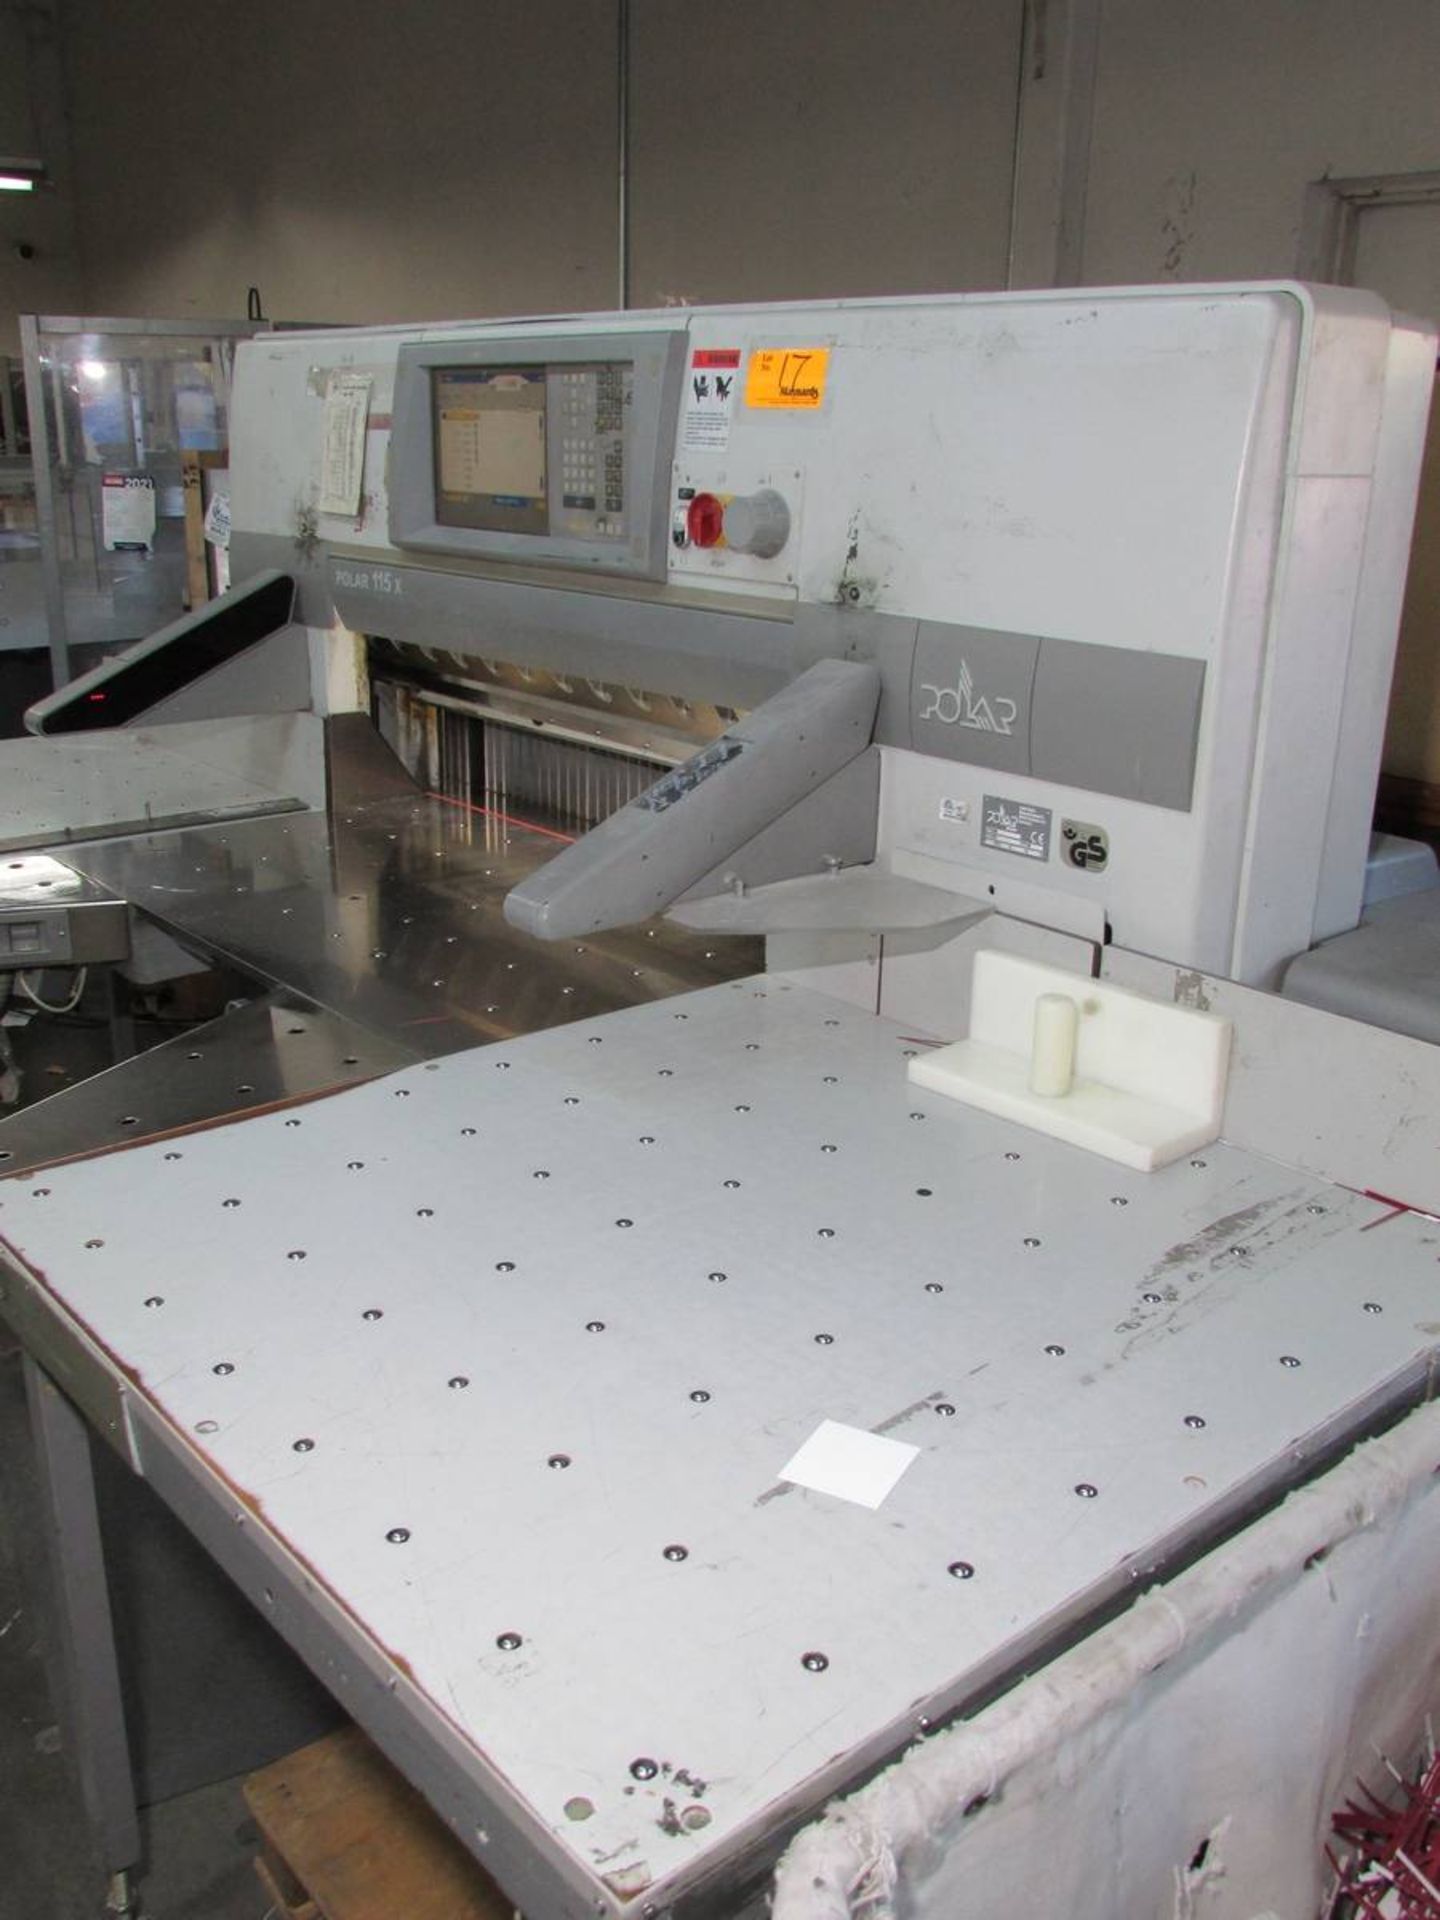 2004 Polar 115X 45" Paper Cutter - Image 14 of 18